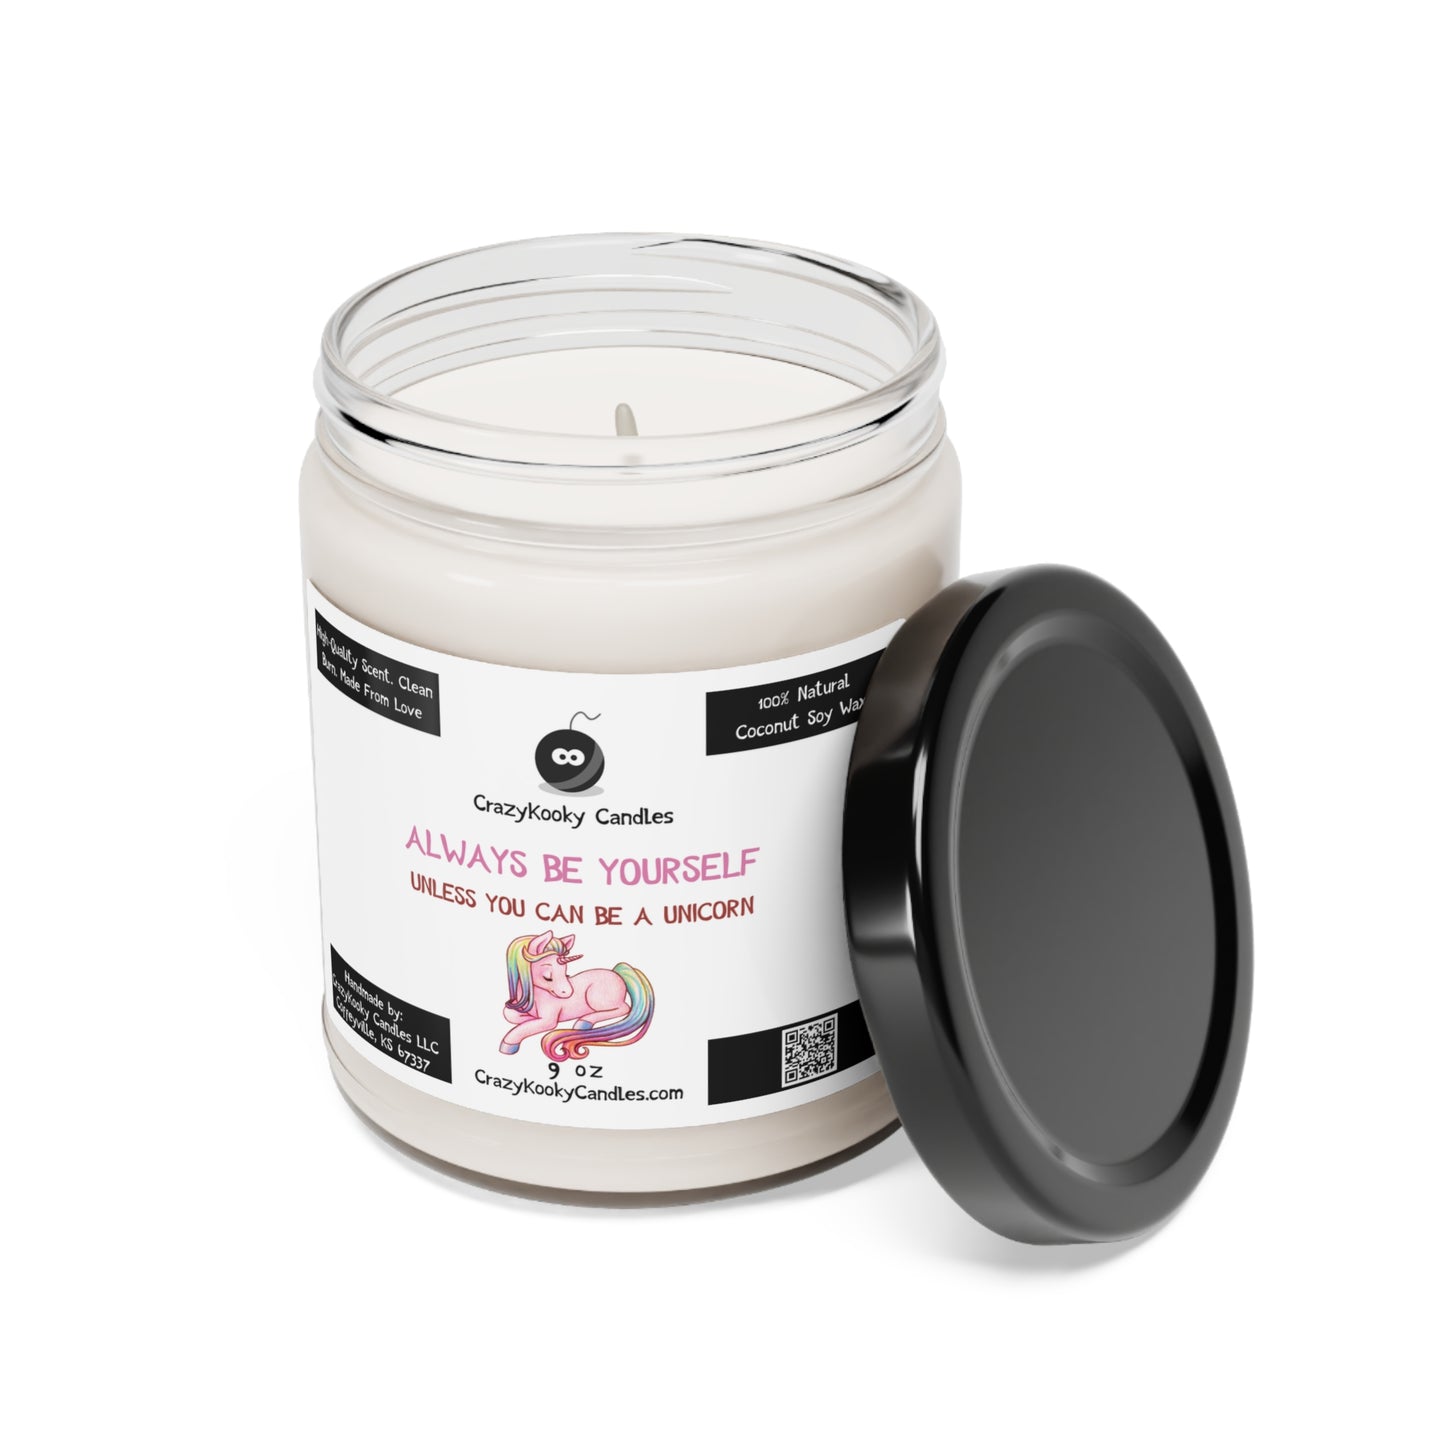 ALWAYS BE YOURSELF UNLESS YOU CAN BE A UNICORN - Funny Candle, Scented Coconut Soy Candle, 9oz - CrazyKooky Candles LLC